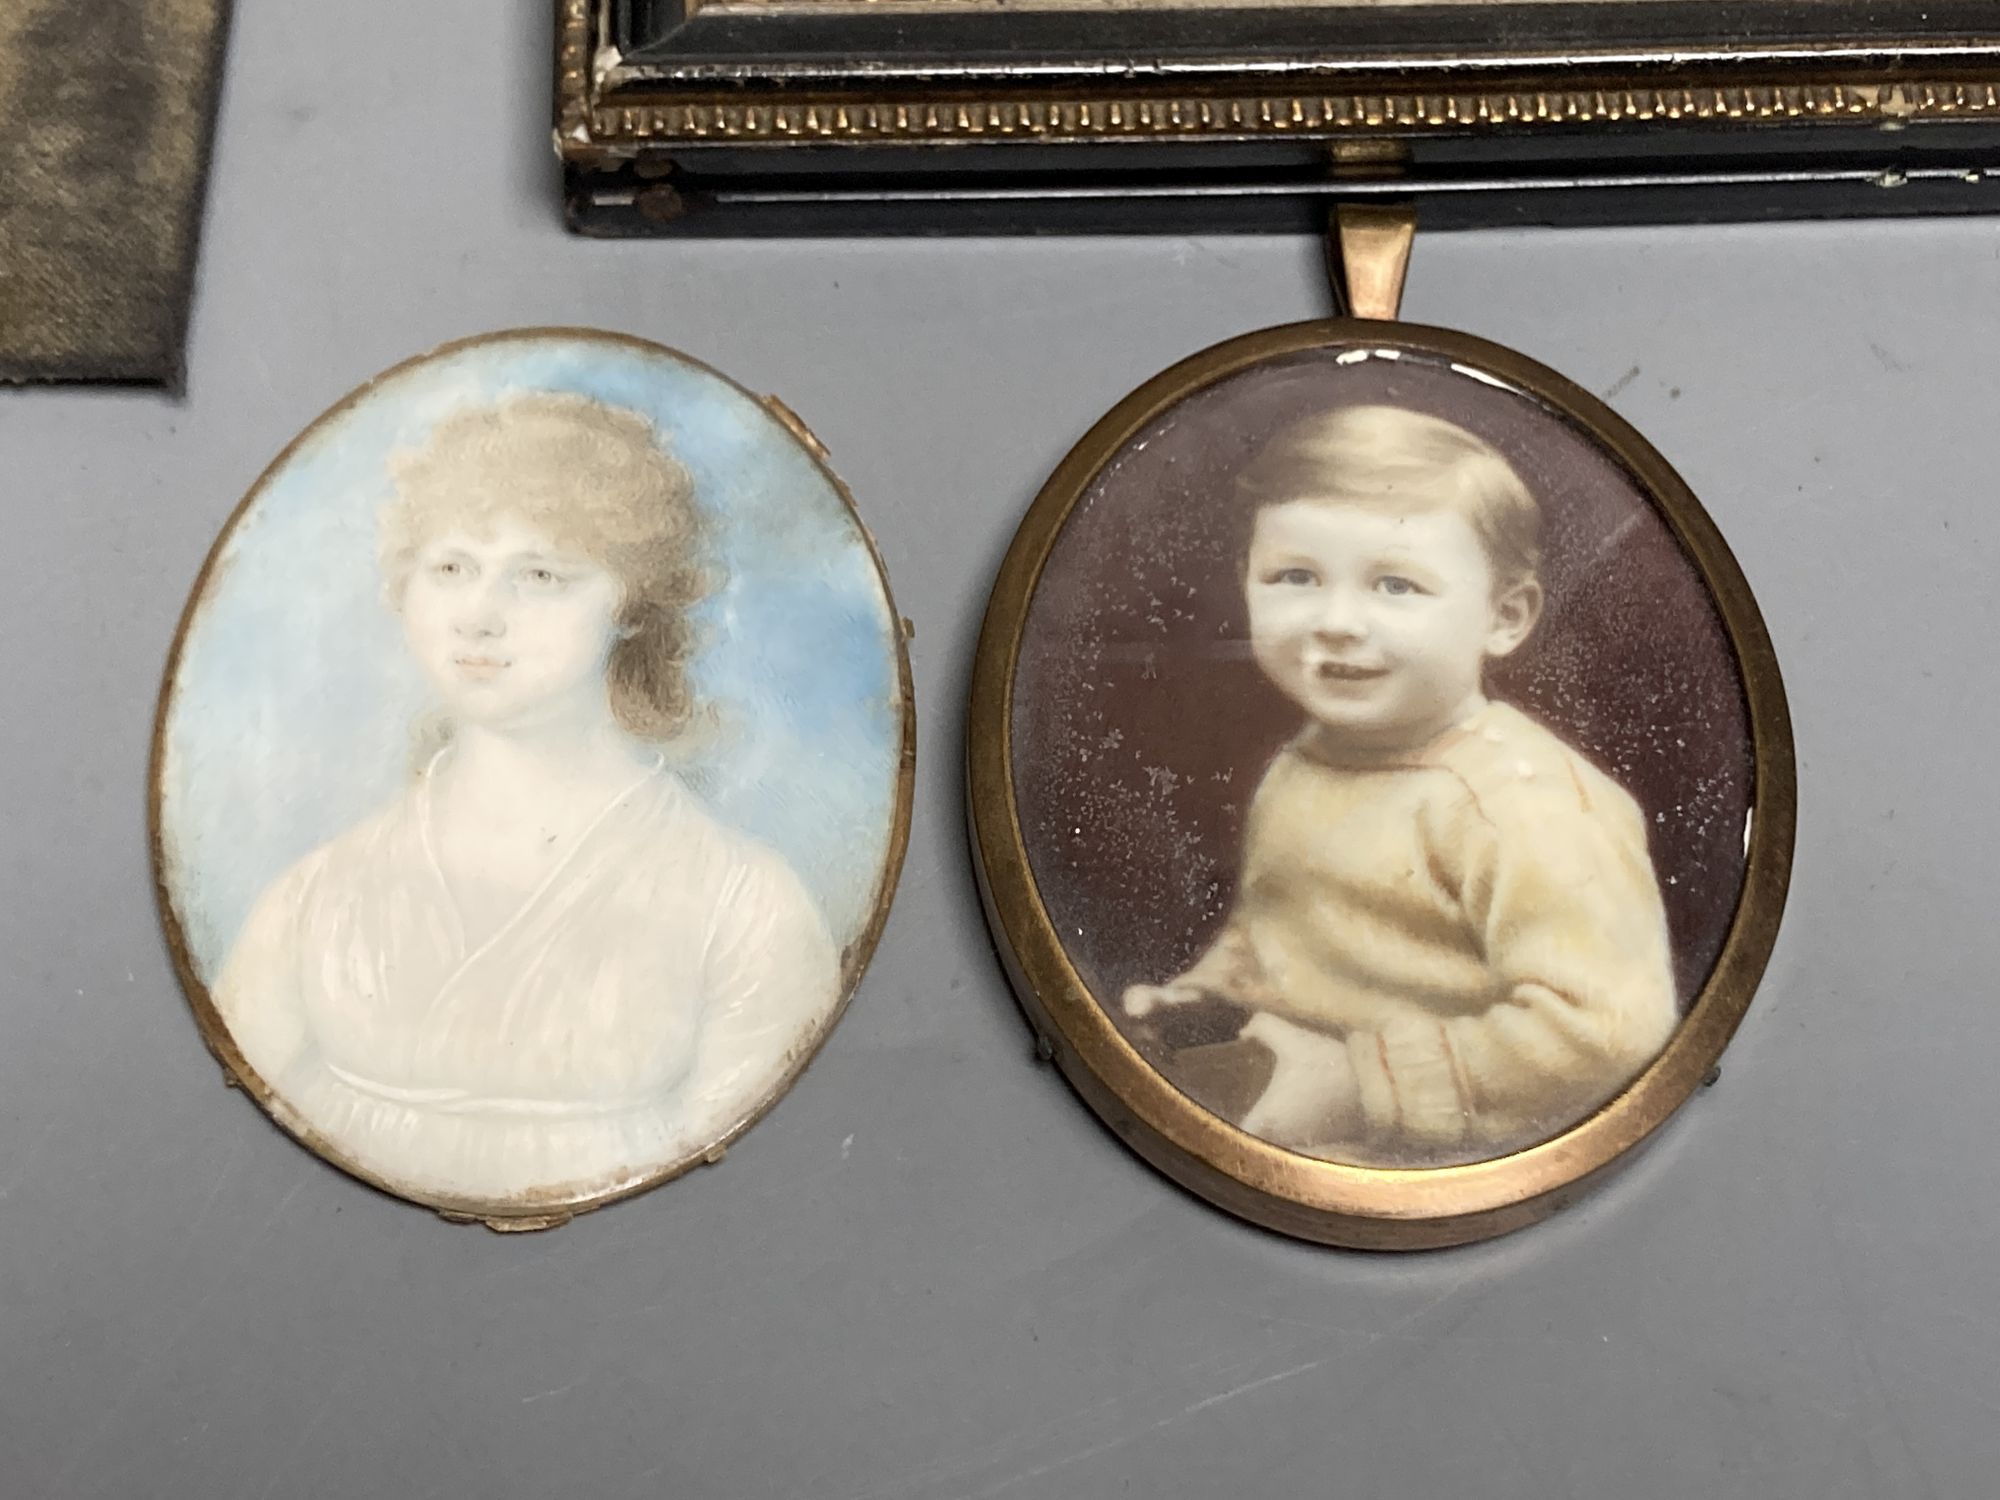 A collection of miniature portraits, including an early 19th century portrait of a young woman, - Image 2 of 5